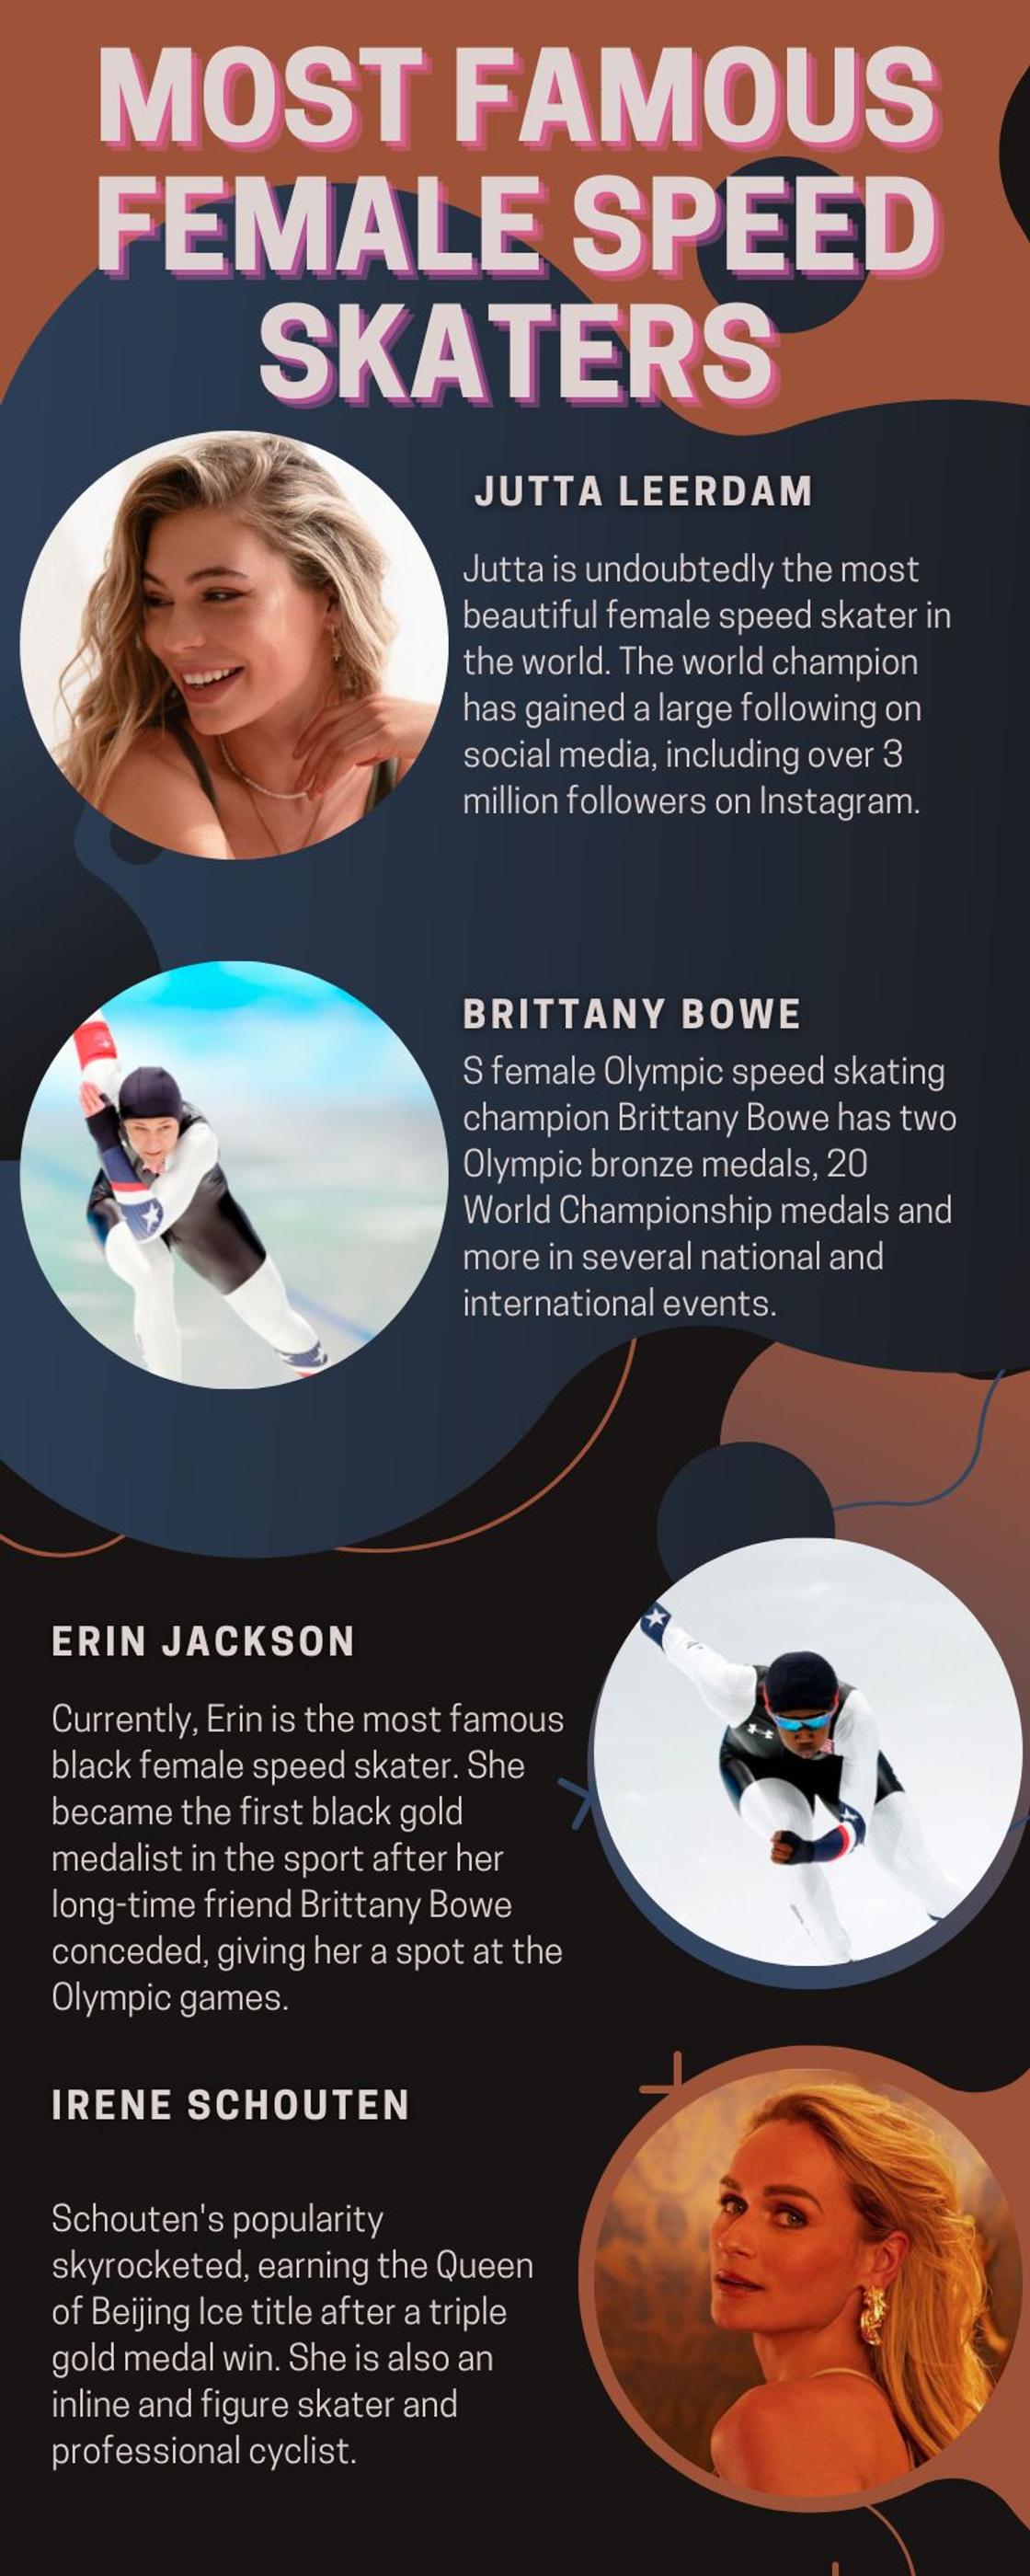 Most famous female speed skaters